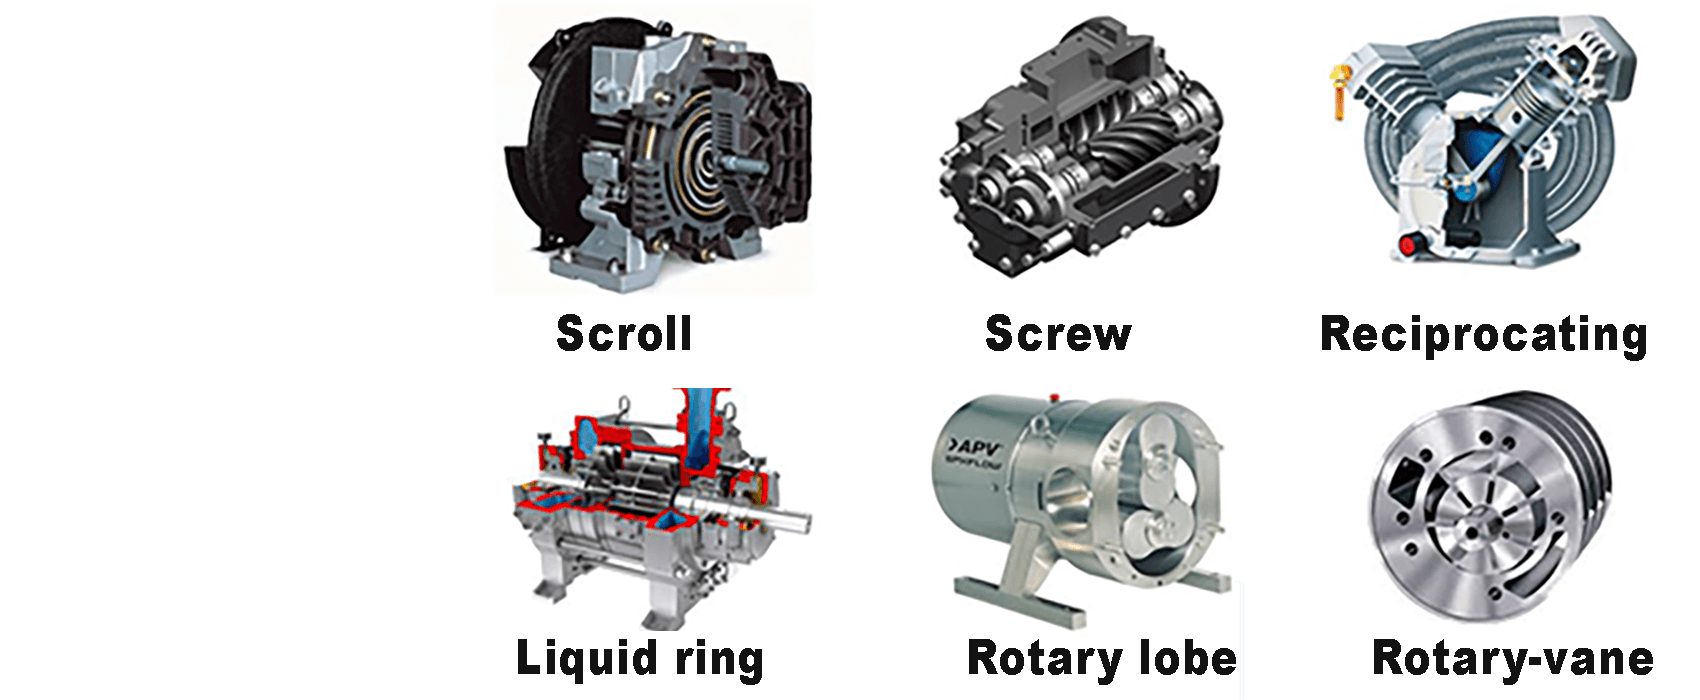 rogers-machinery-how-to-choose-the-right-compressor-for-new-plants